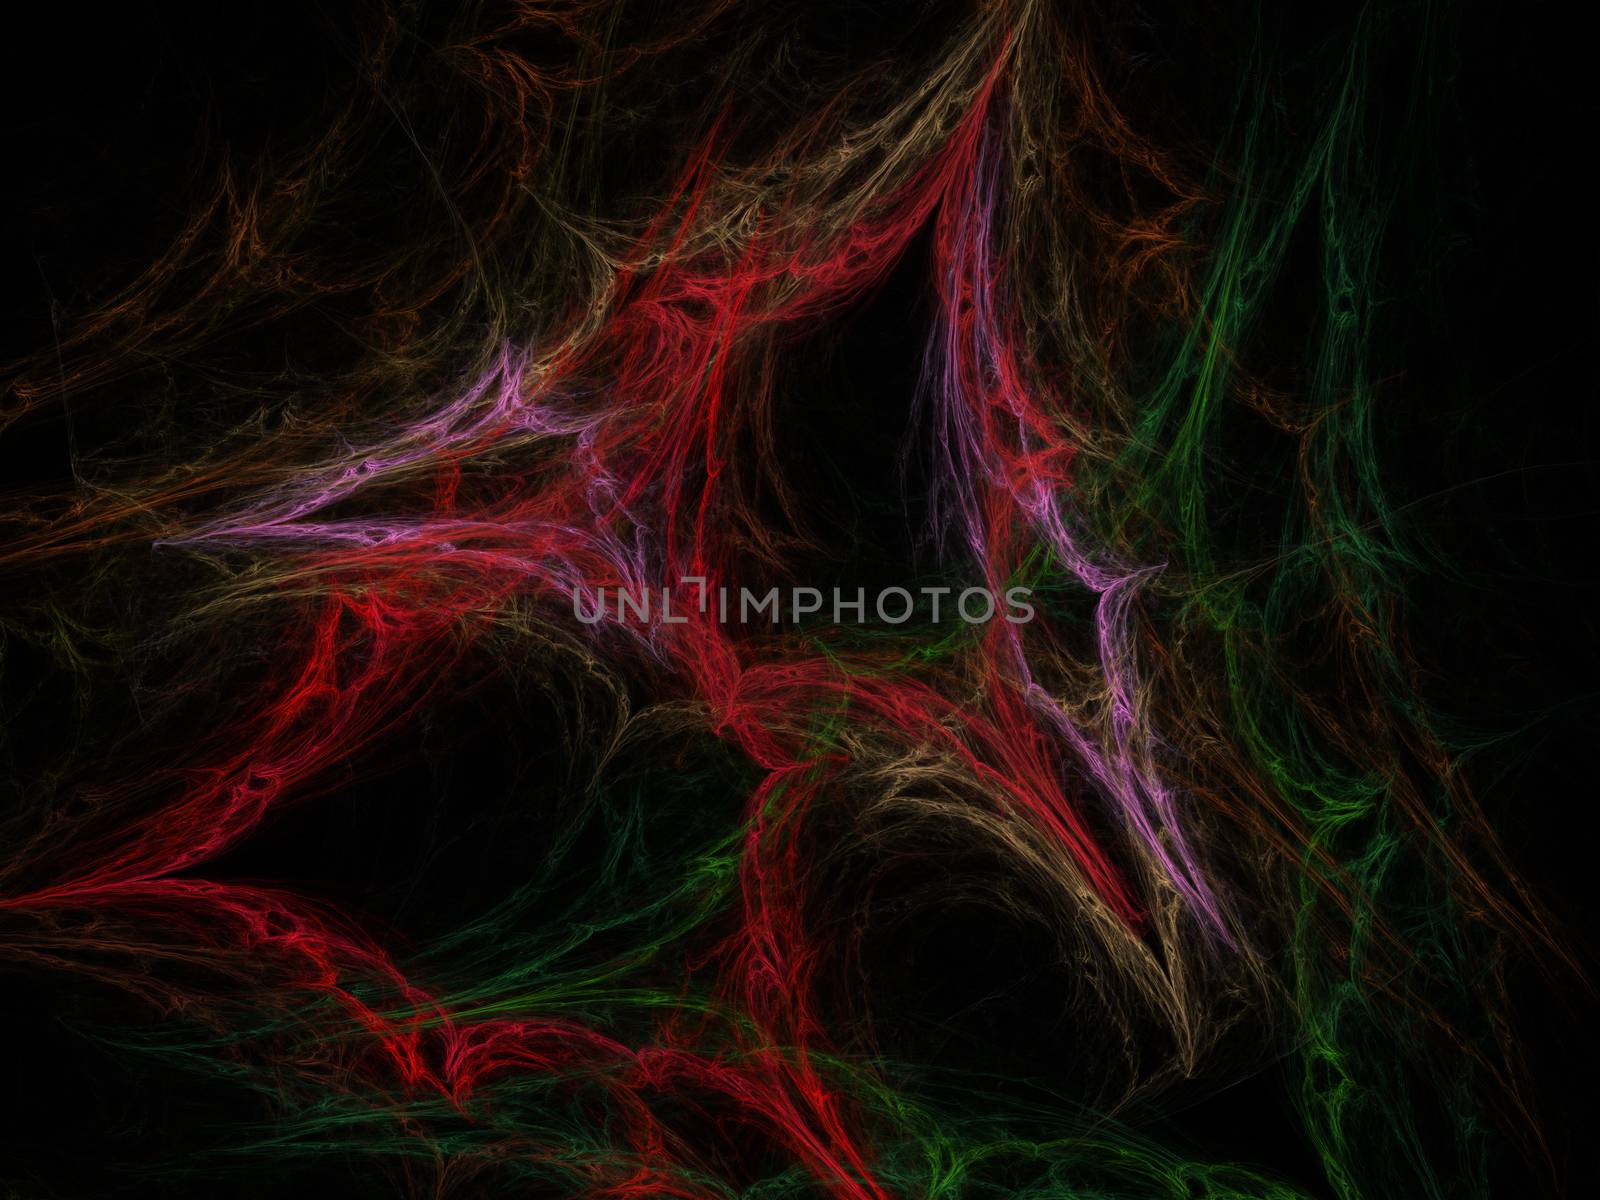 3D rendering abstract fractal light background by Sem007